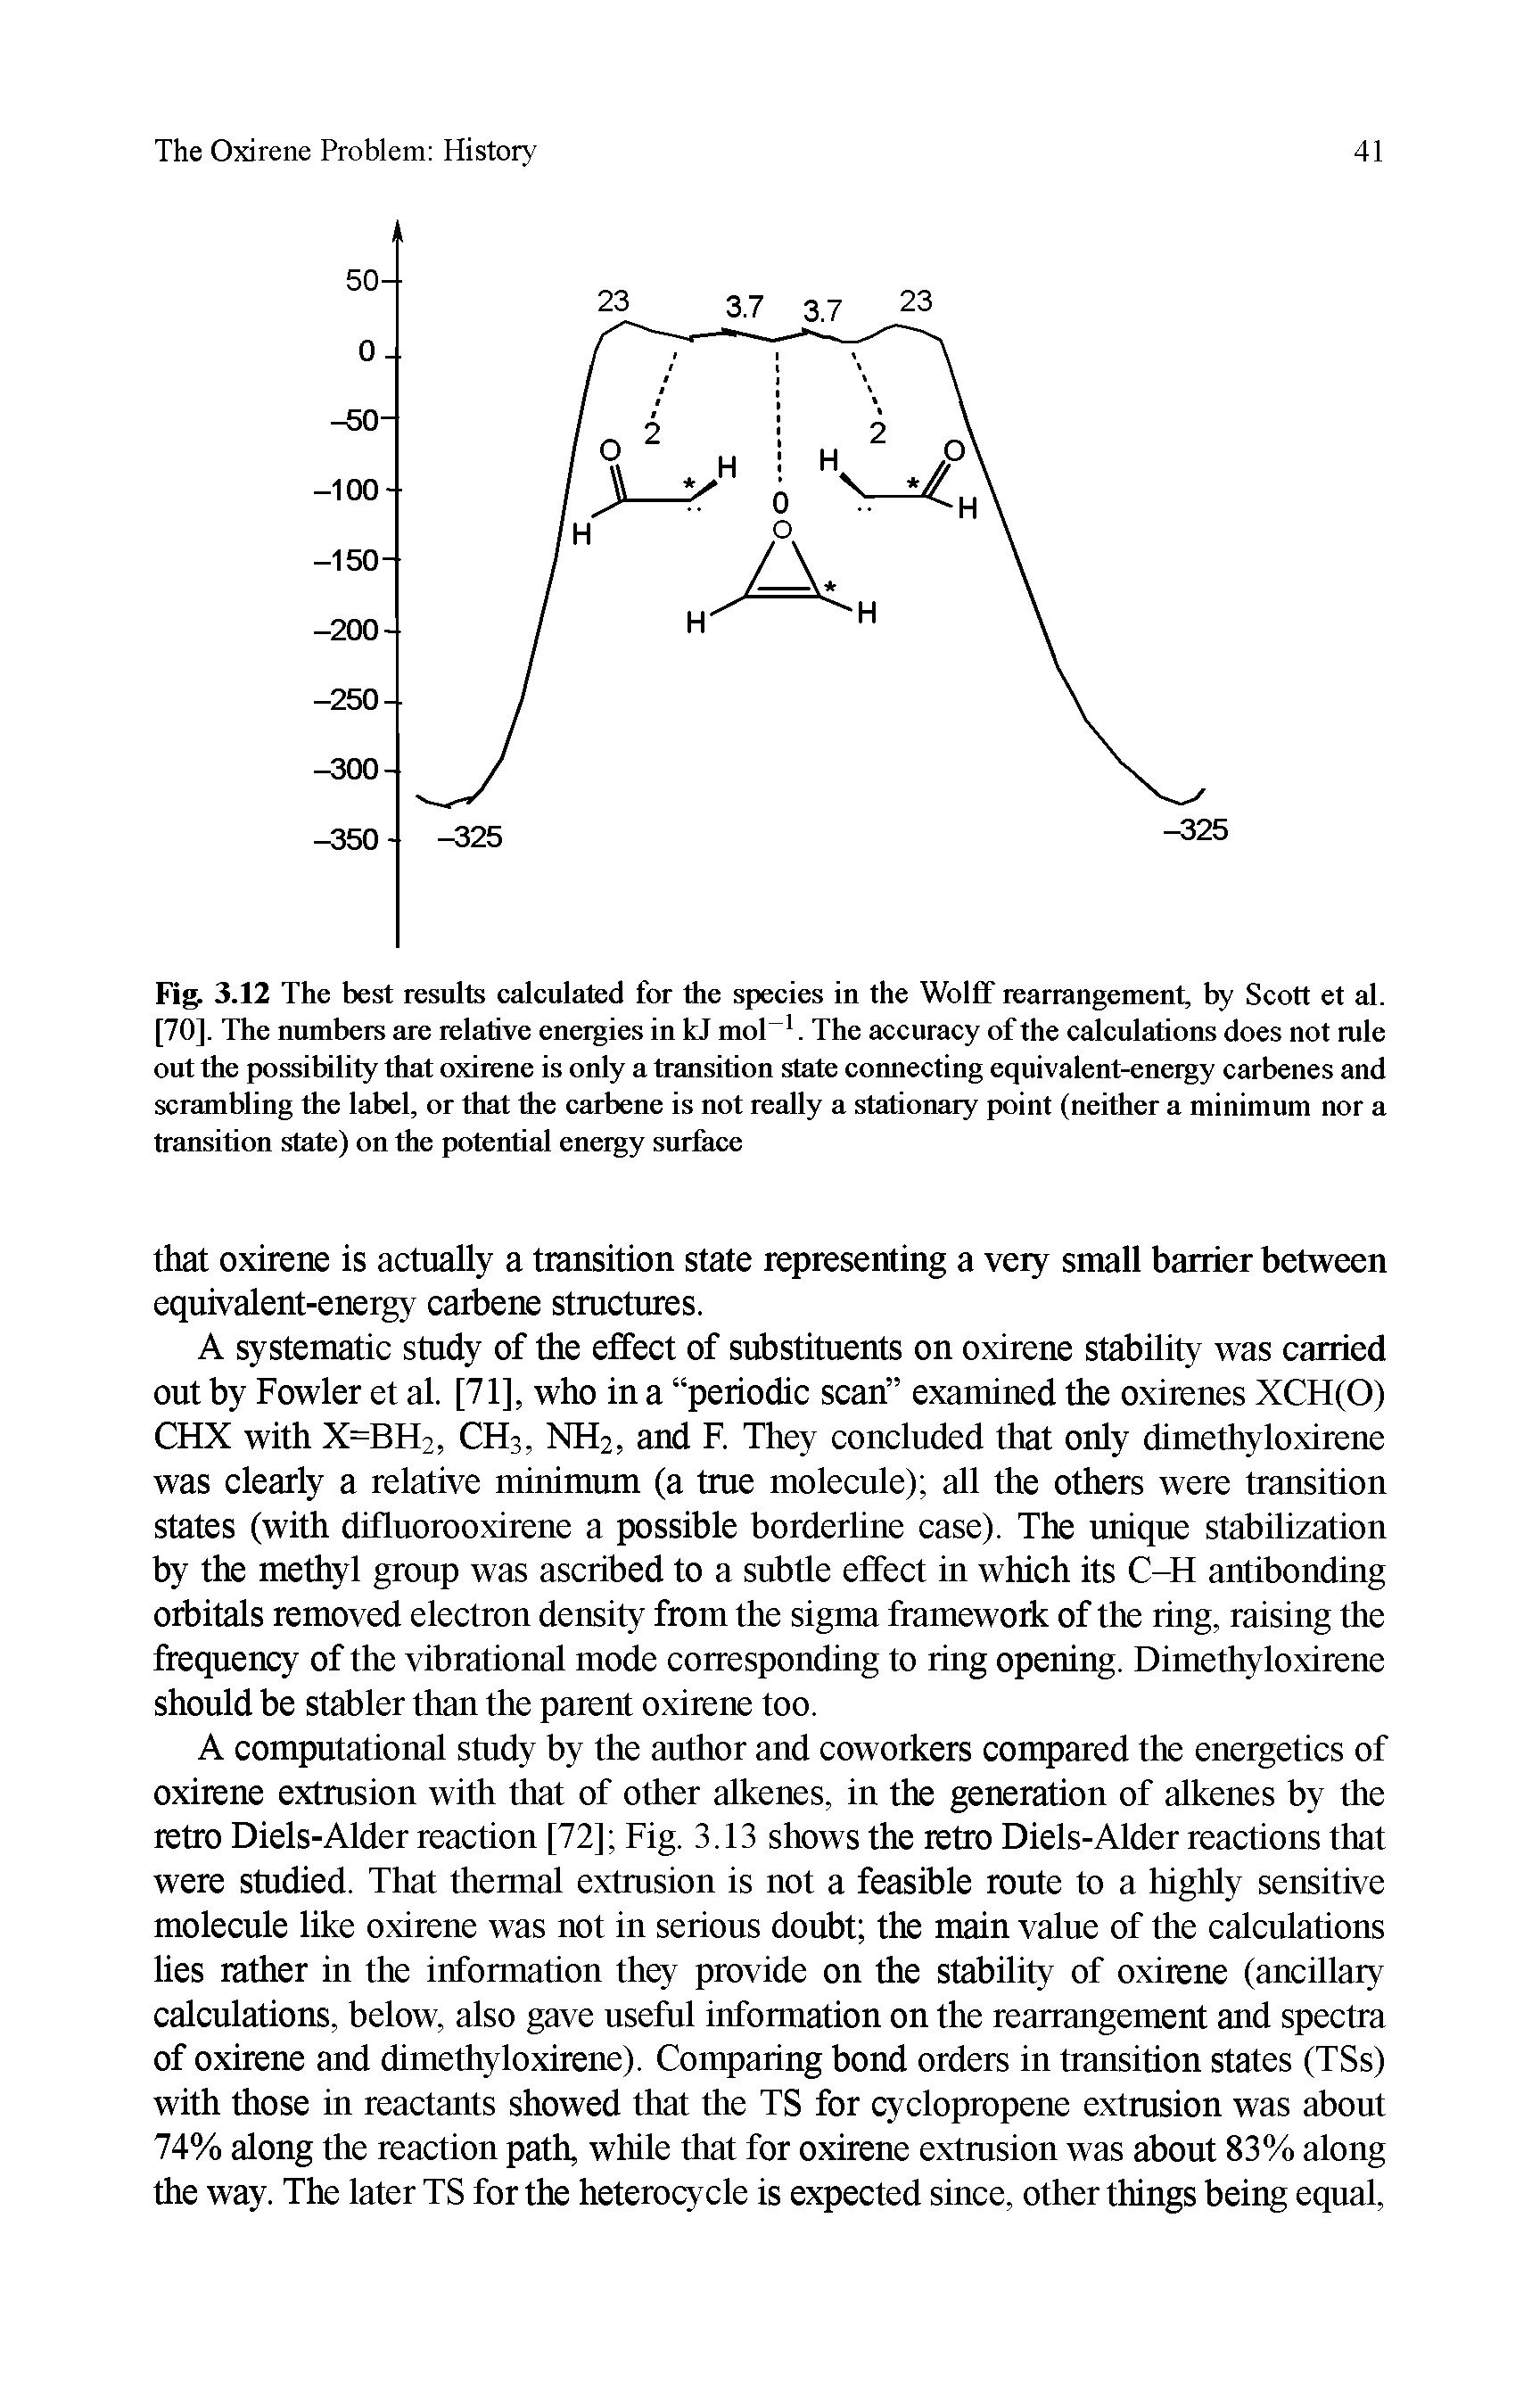 Fig. 3.12 The best results calculated for the species in the Wolff rearrangement by Scott et al. [70]. The numbers are relative energies in kJ mol . The accuracy of the calculations does not rule out the possibility that oxirene is only a transition state connecting equivalent-energy carbenes and scrambling the label, or that the carbene is not really a stationary point (neither a minimum nor a transition state) on the potential energy sur ce...